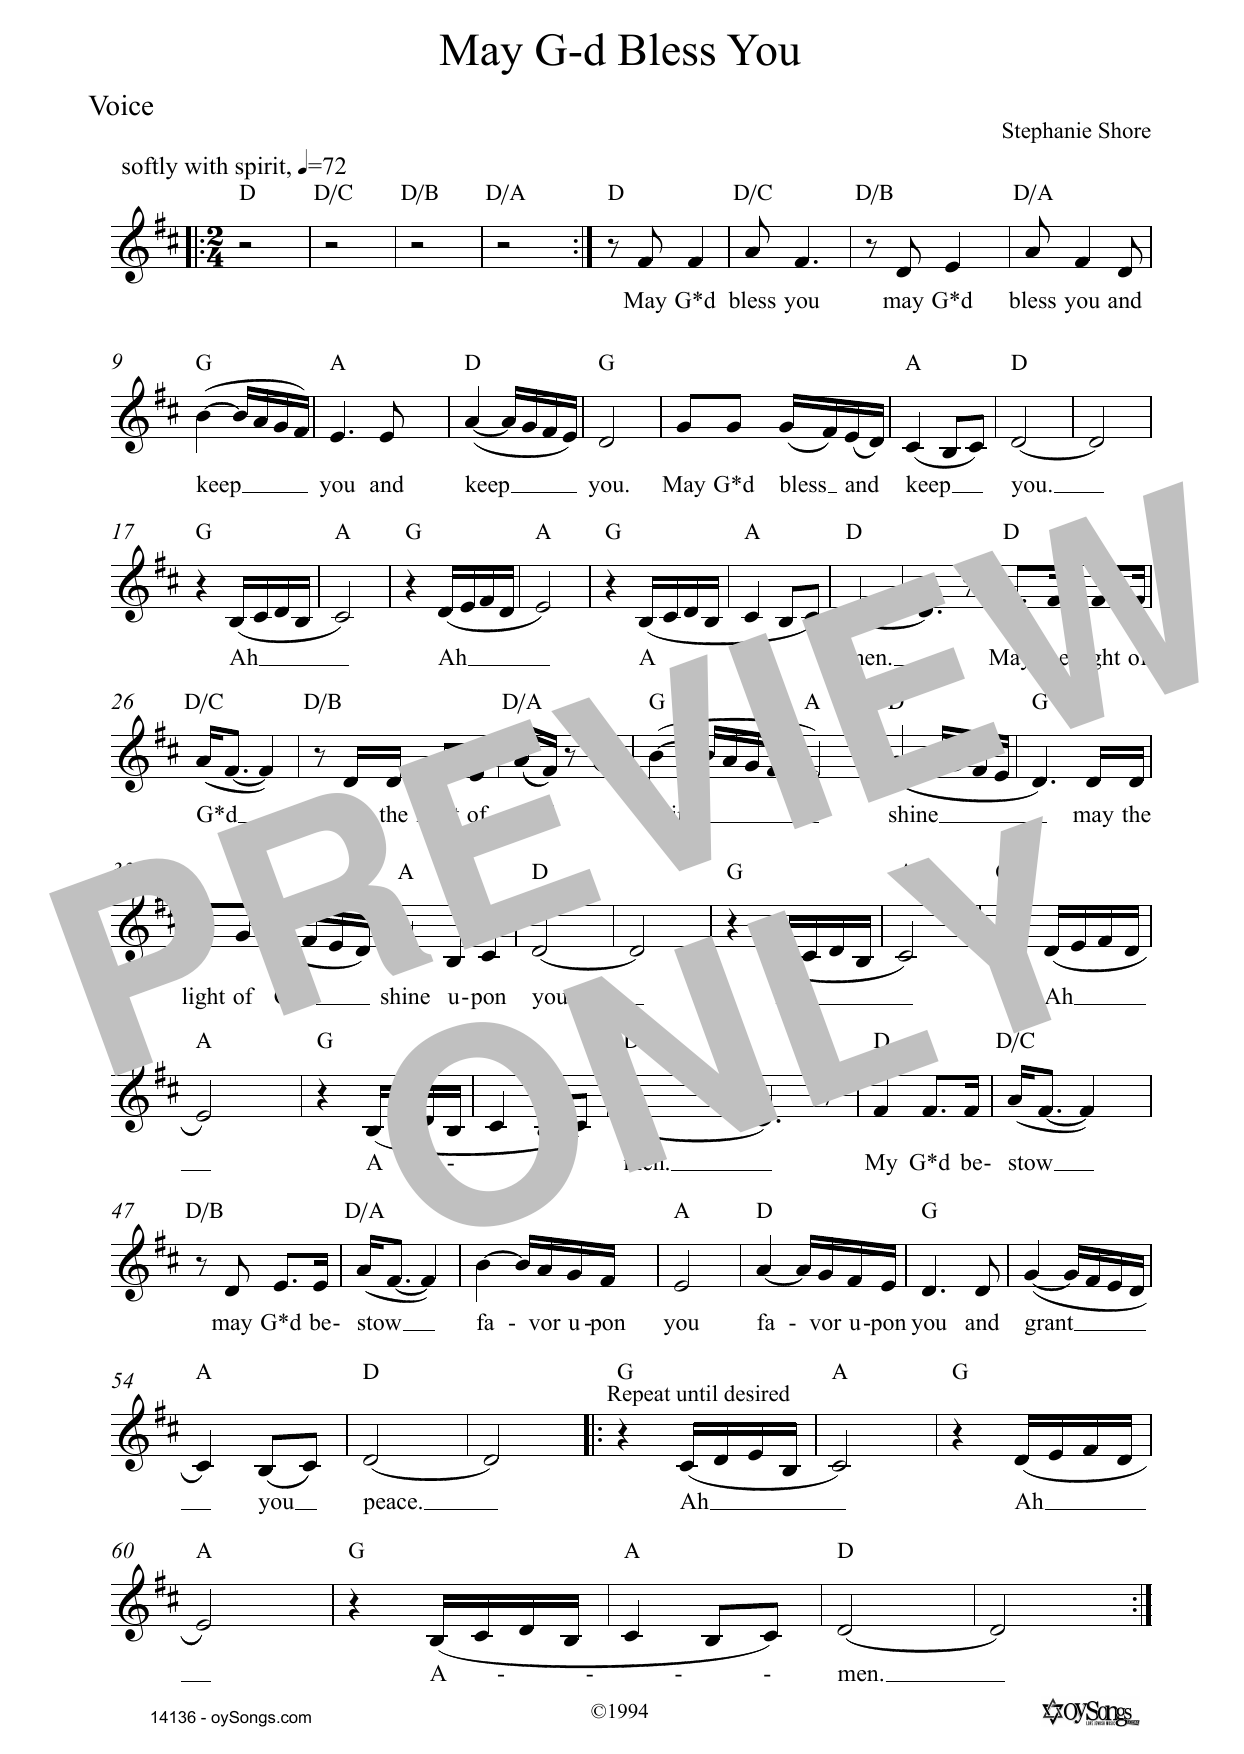 Download Stephanie Shore May G-d Bless You Sheet Music